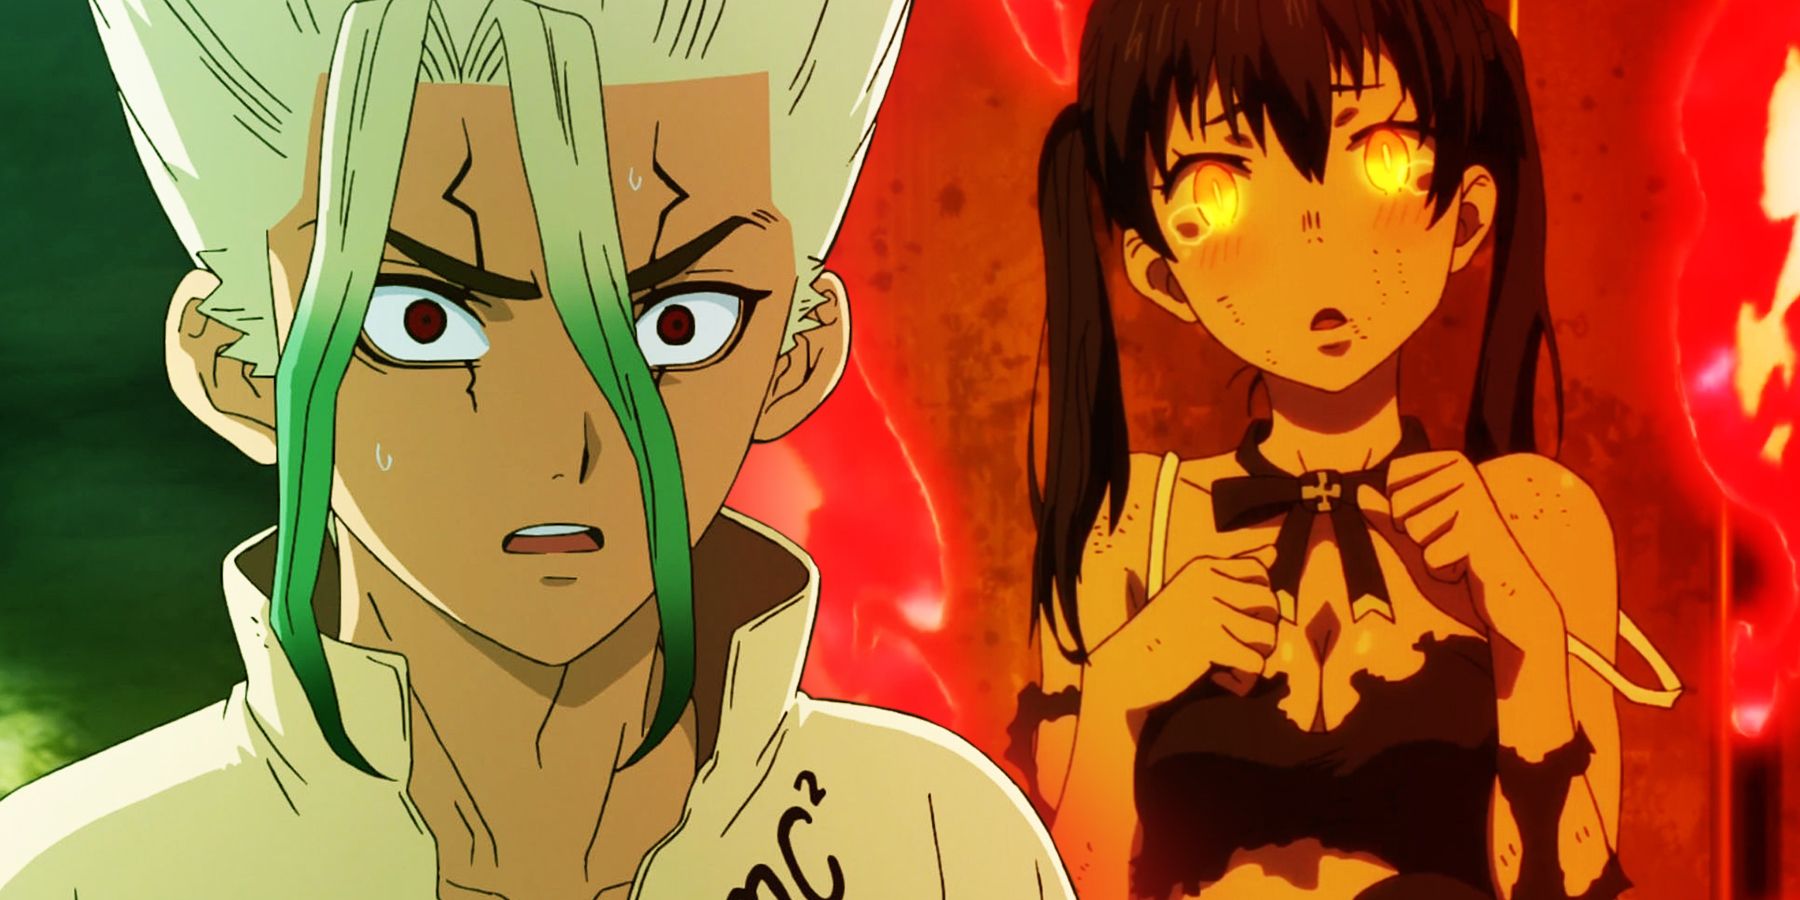 On the left, Dr. Stone of 'Dr. Stone' looks surprised. On the right, Tamaki Kotasu of 'Fire Force' looks bewildered while surrounded by flames. 